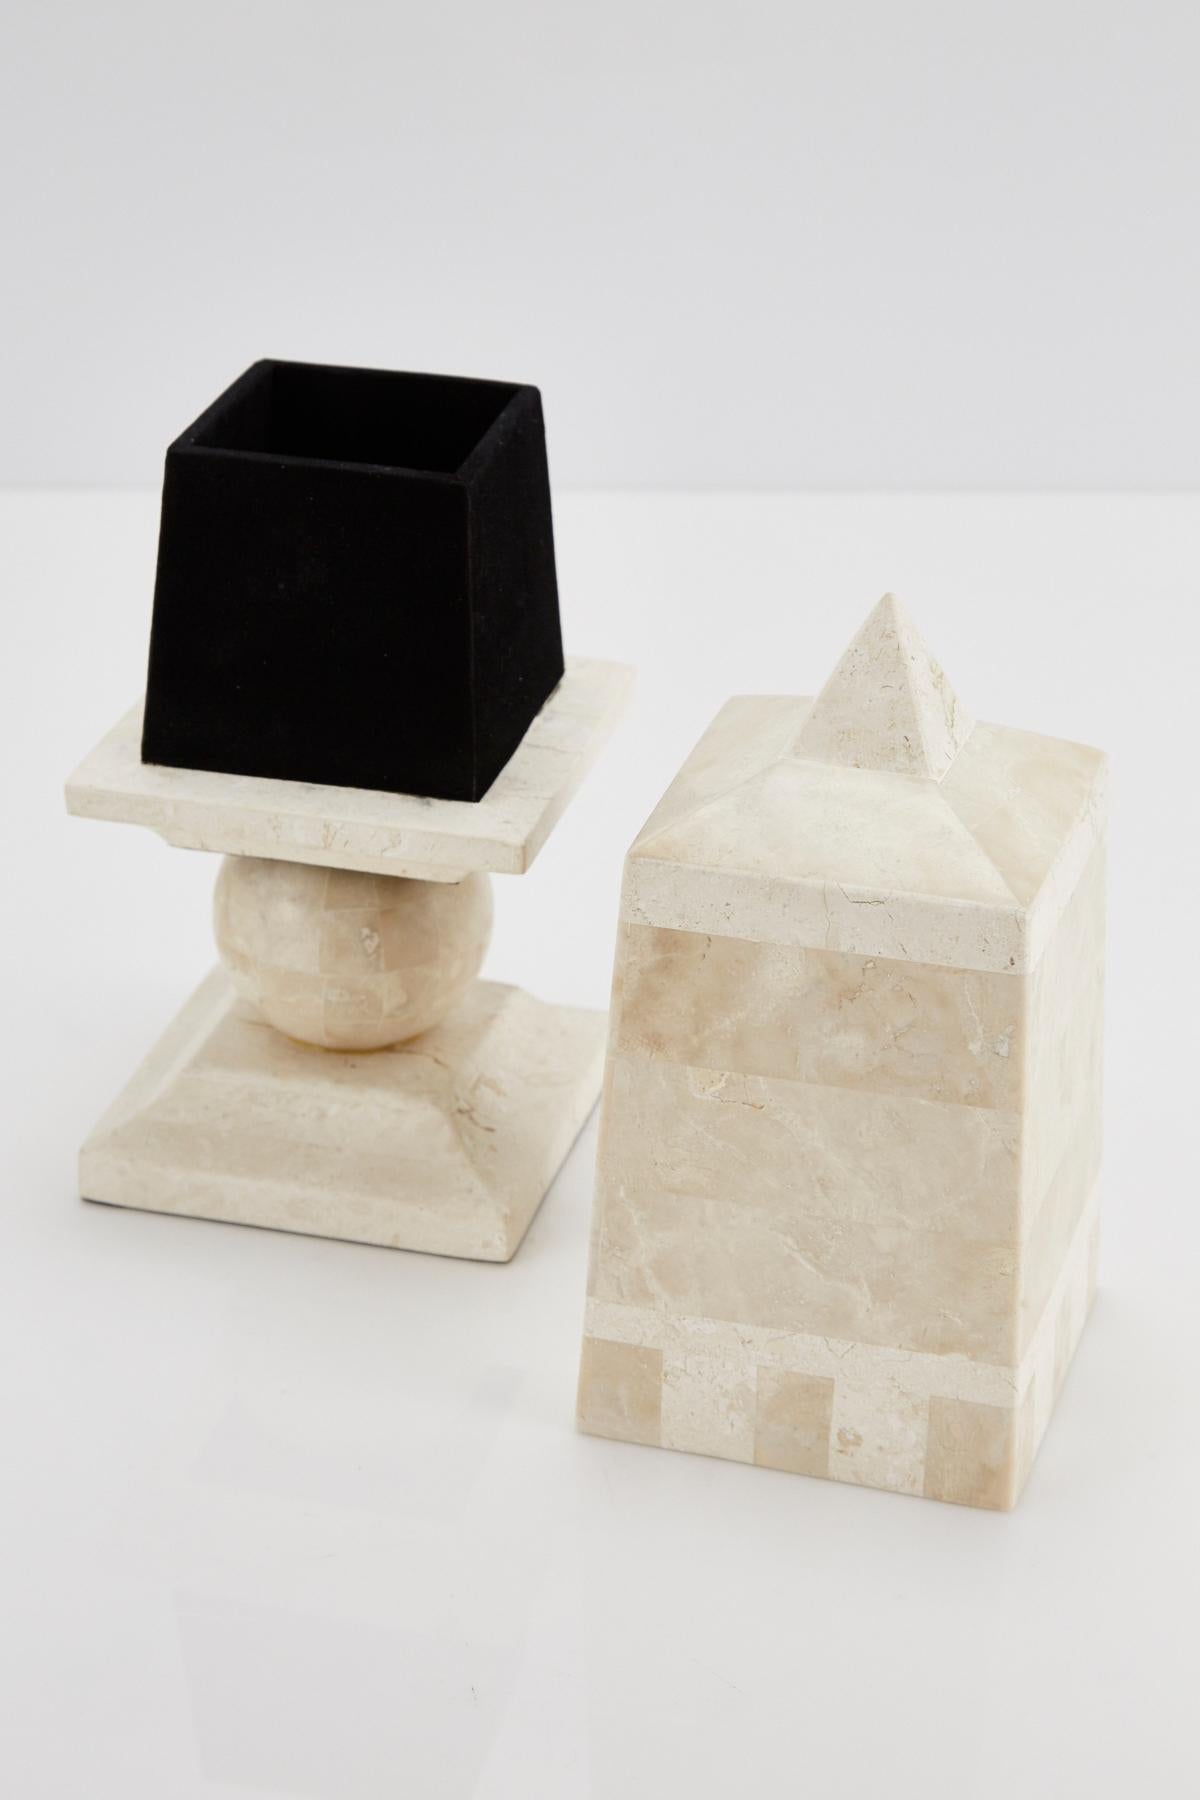 Philippine Postmodern Obelisk Shaped Two-Toned Tessellated Stone Secret Box, 1990s For Sale